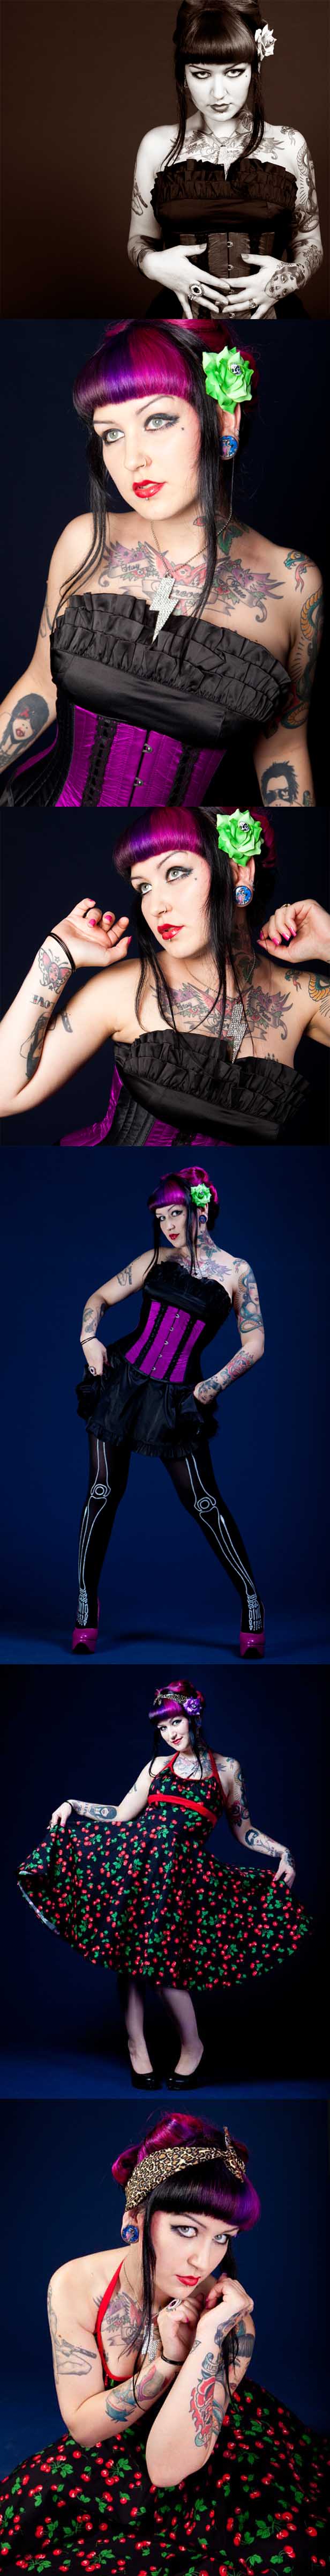 Female model photo shoot of Miss Cherry Martini by Crescent Moon, hair styled by MadamK